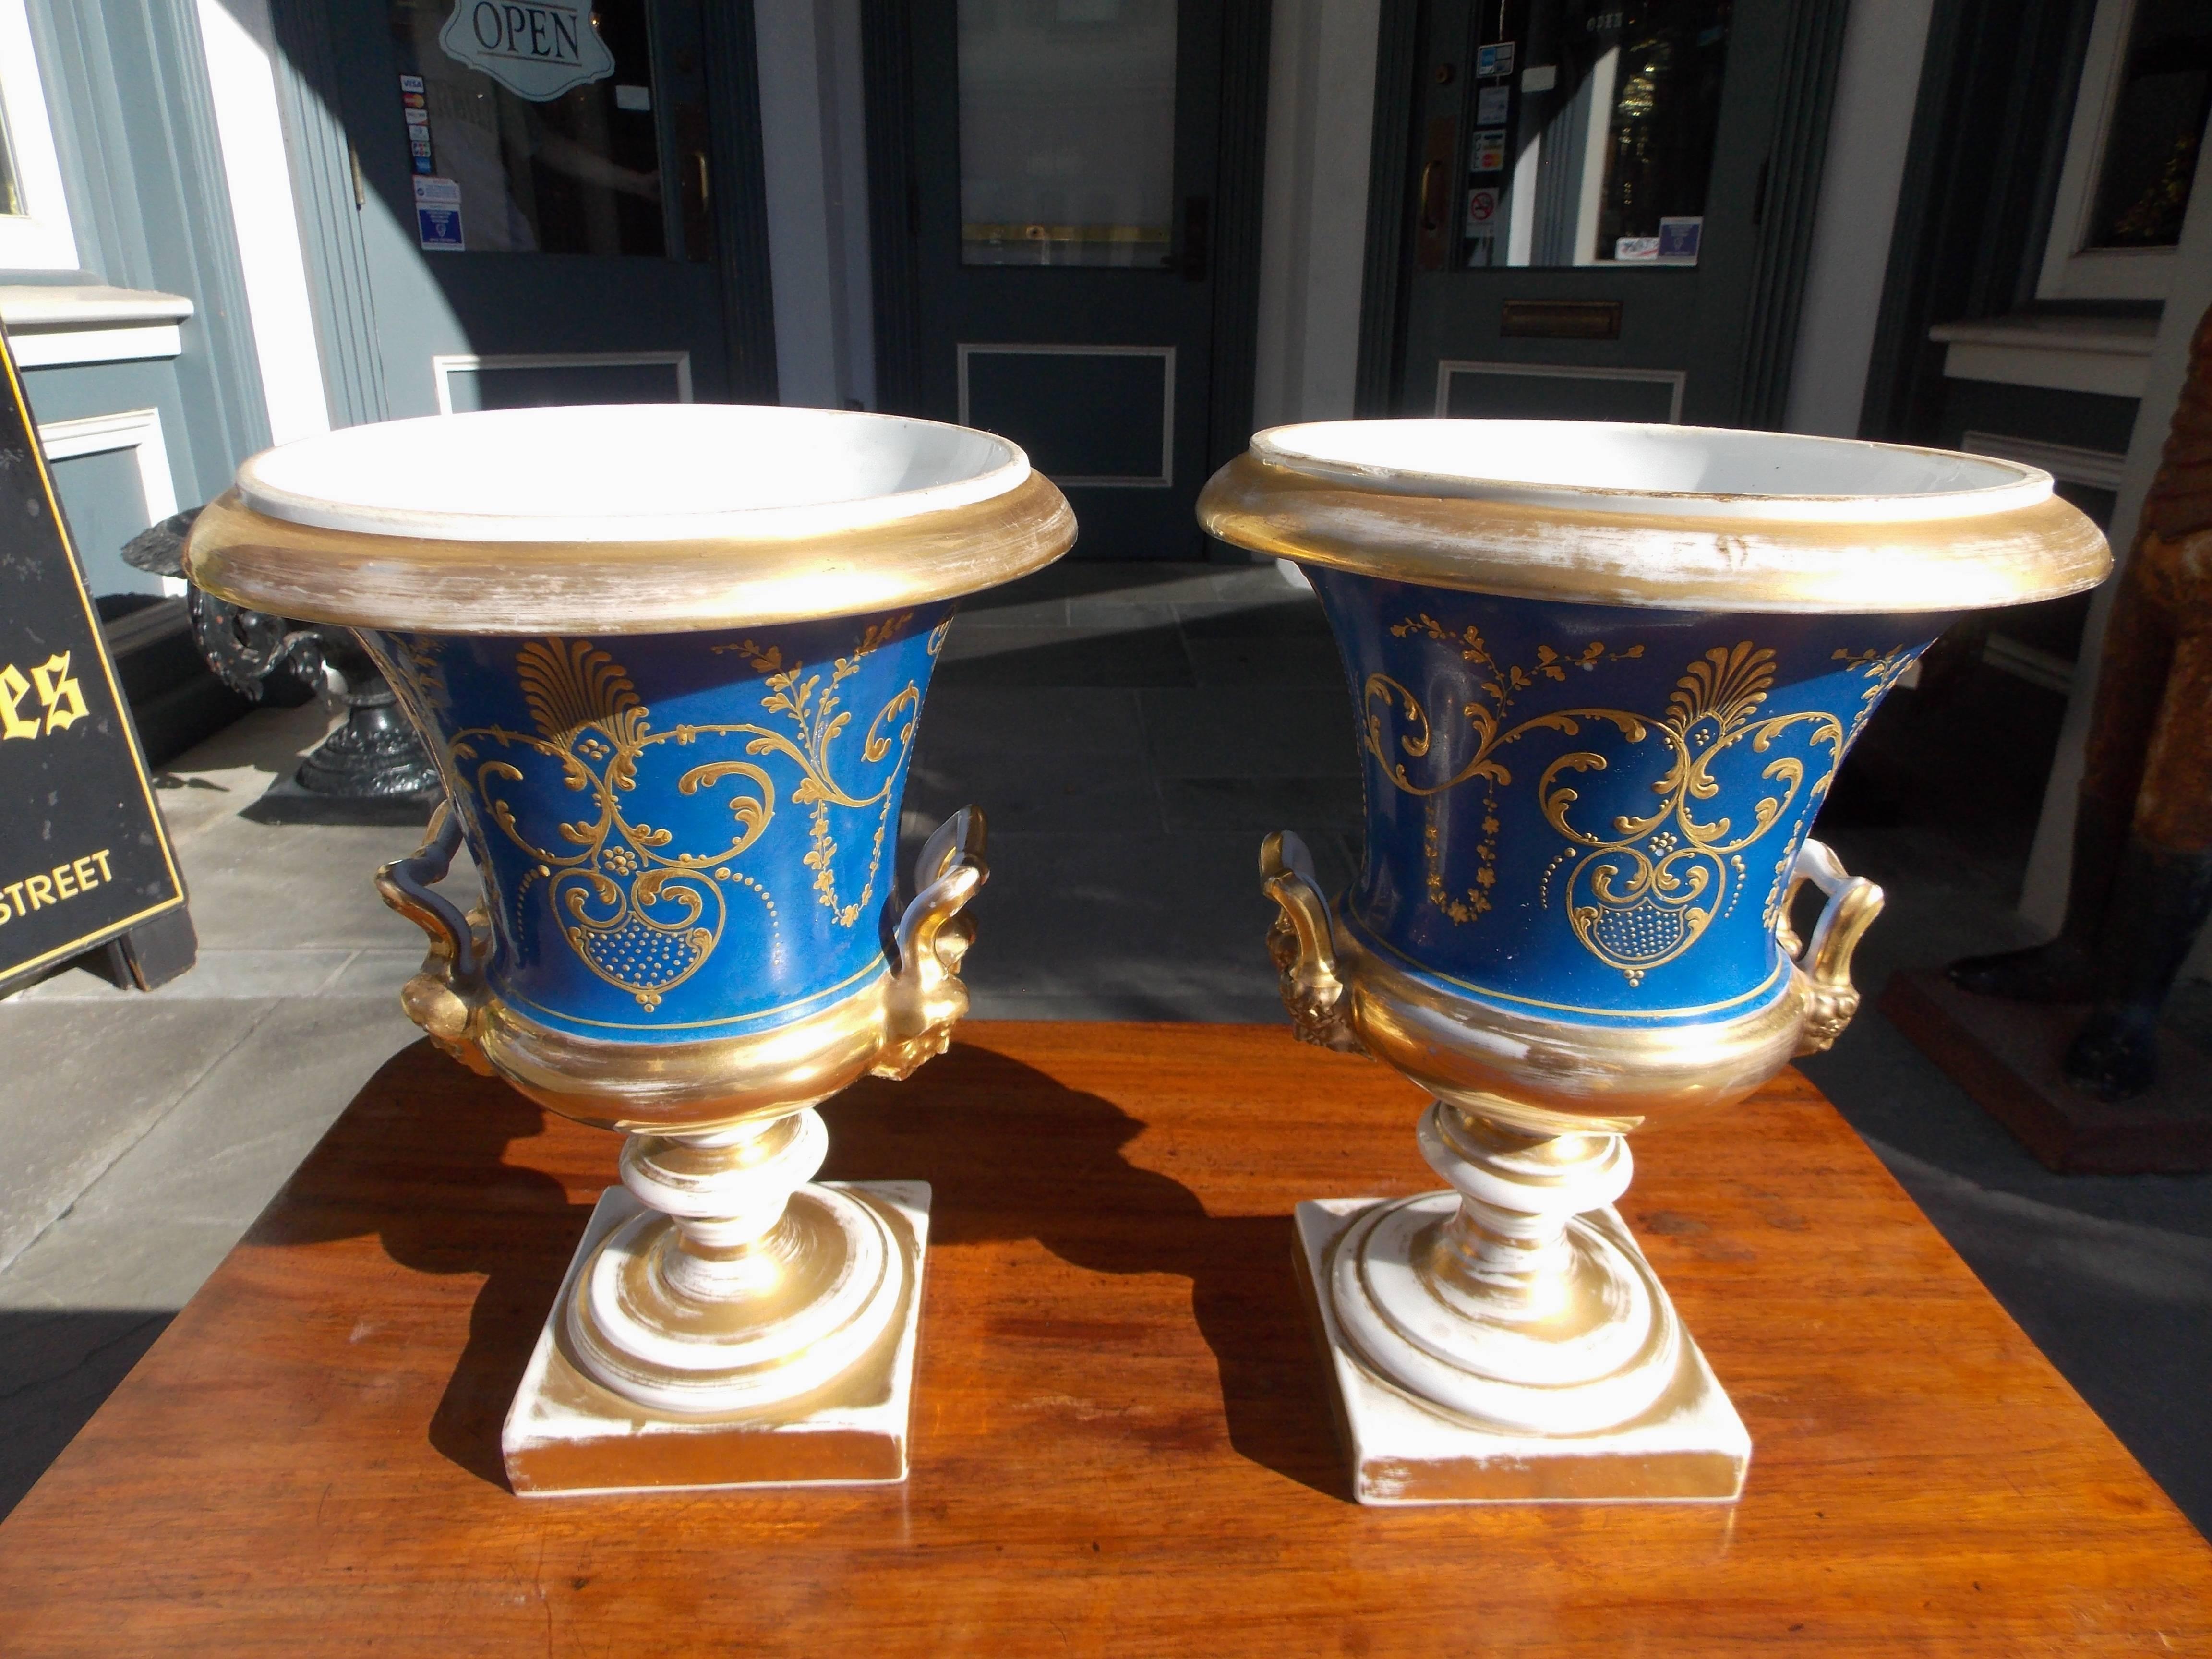  Pair of French Old Paris Gilt & Cobalt Blue Porcelain Mantel Urns, Circa 1820 In Excellent Condition In Hollywood, SC